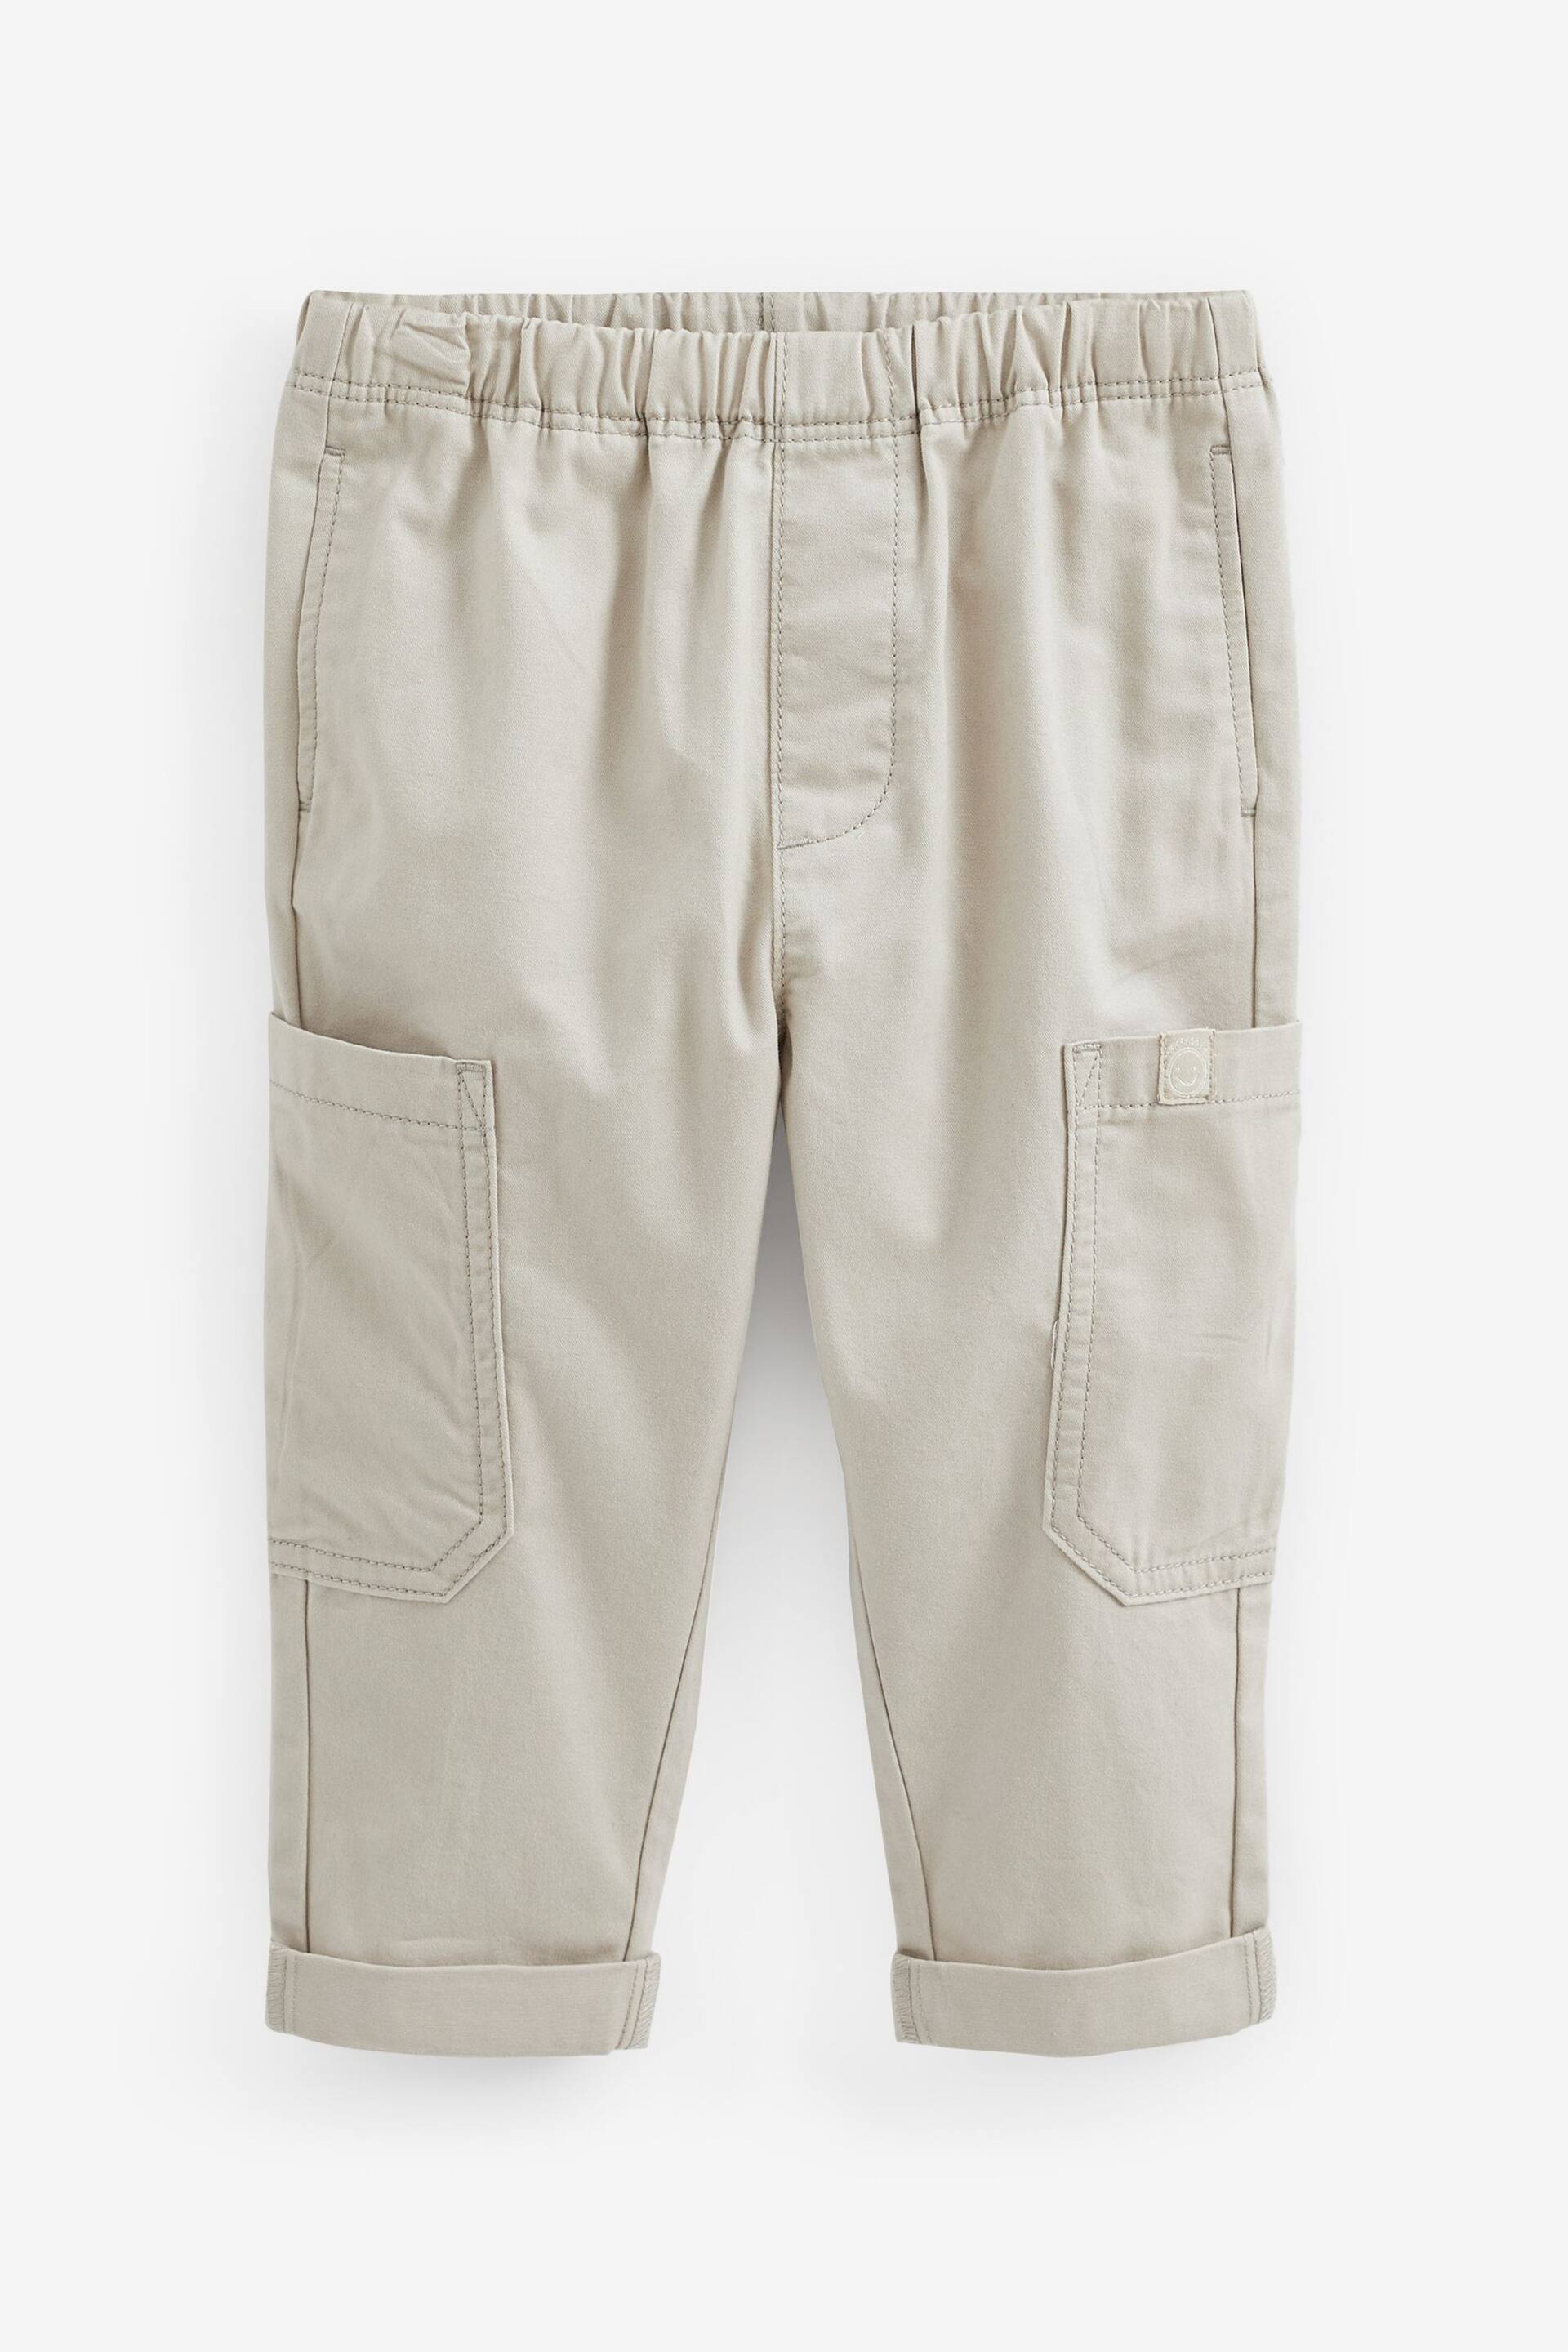 Neutral Side Pocket Pull-On Trousers (3mths-7yrs) - Image 5 of 6